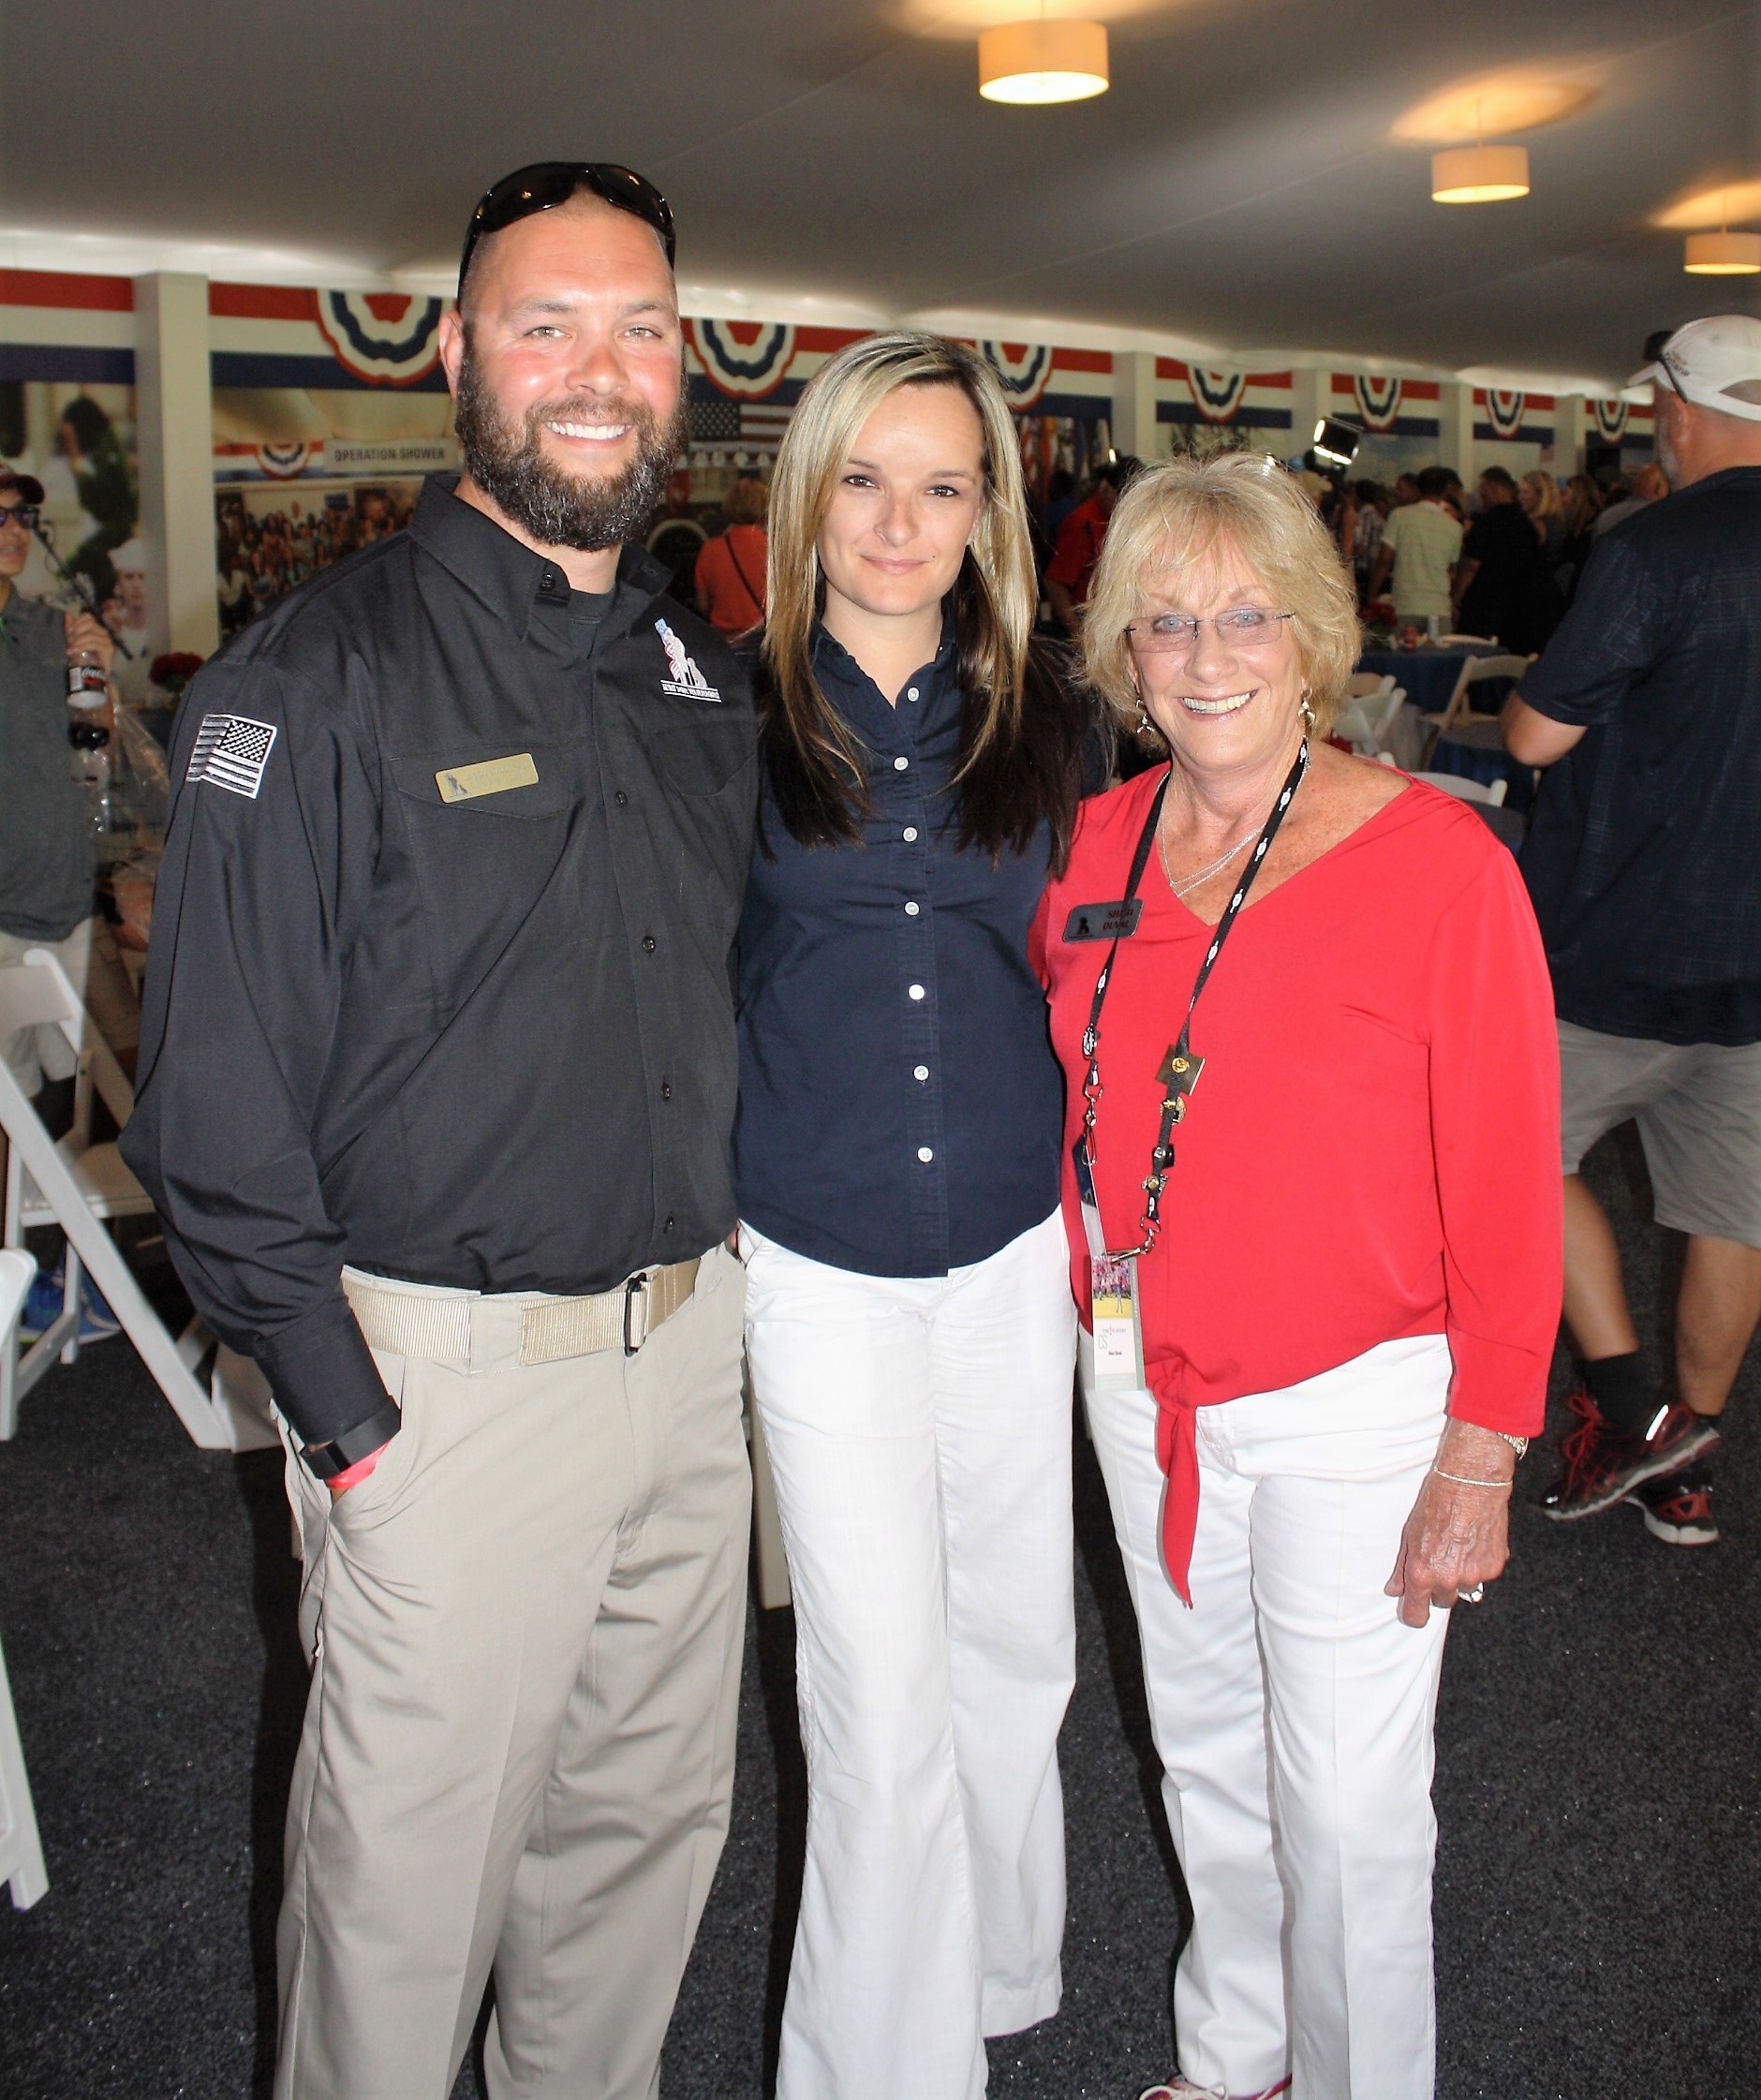 K9s for Warriors Founder Shari Duval (right) joins Director of Warrior Operations Jason Snodgrass and Rachael Maguire. An hour later, Snodgrass proposed to Maguire at the Military Appreciation Day ceremonies.